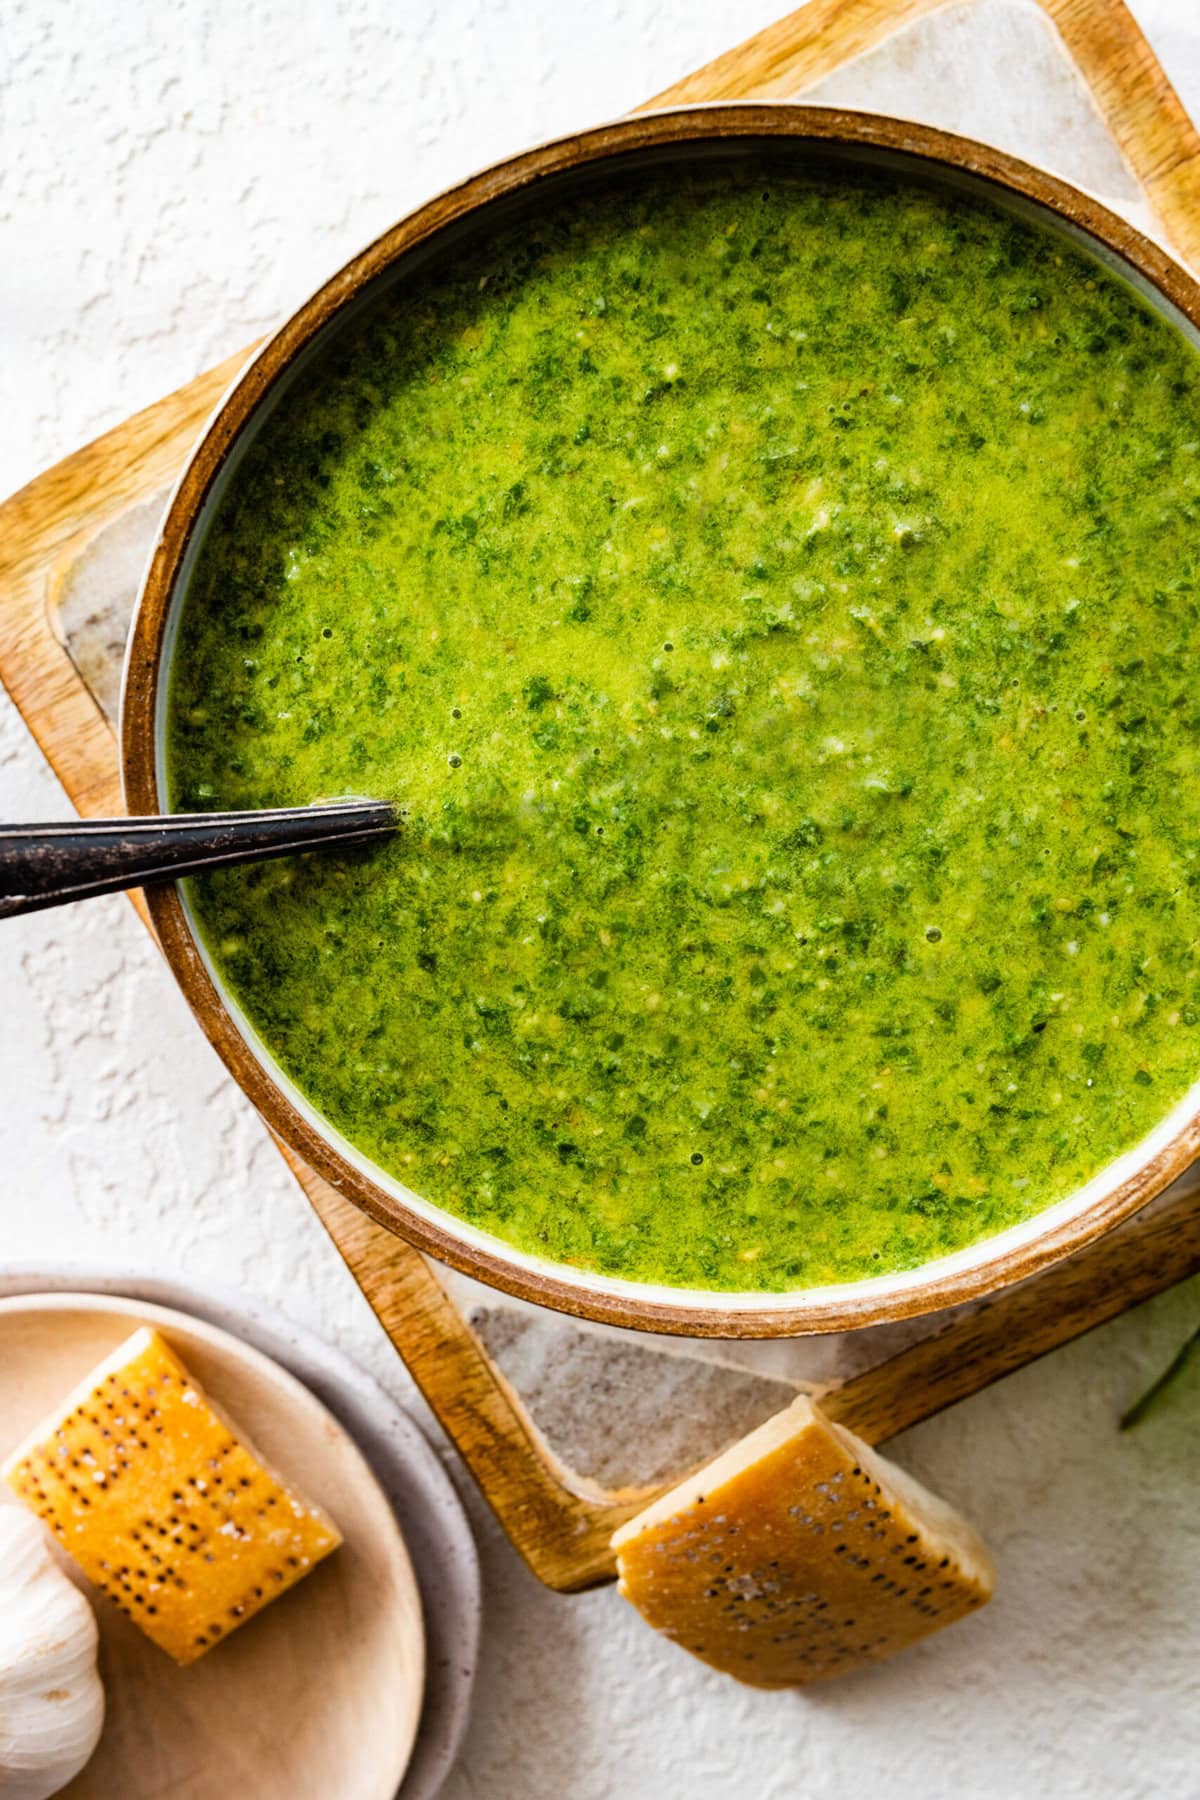 spoonful of Best Authentic Pesto Genovese (Basil Pesto) over the bowl of fresh pesto. Parmigiano on the side.